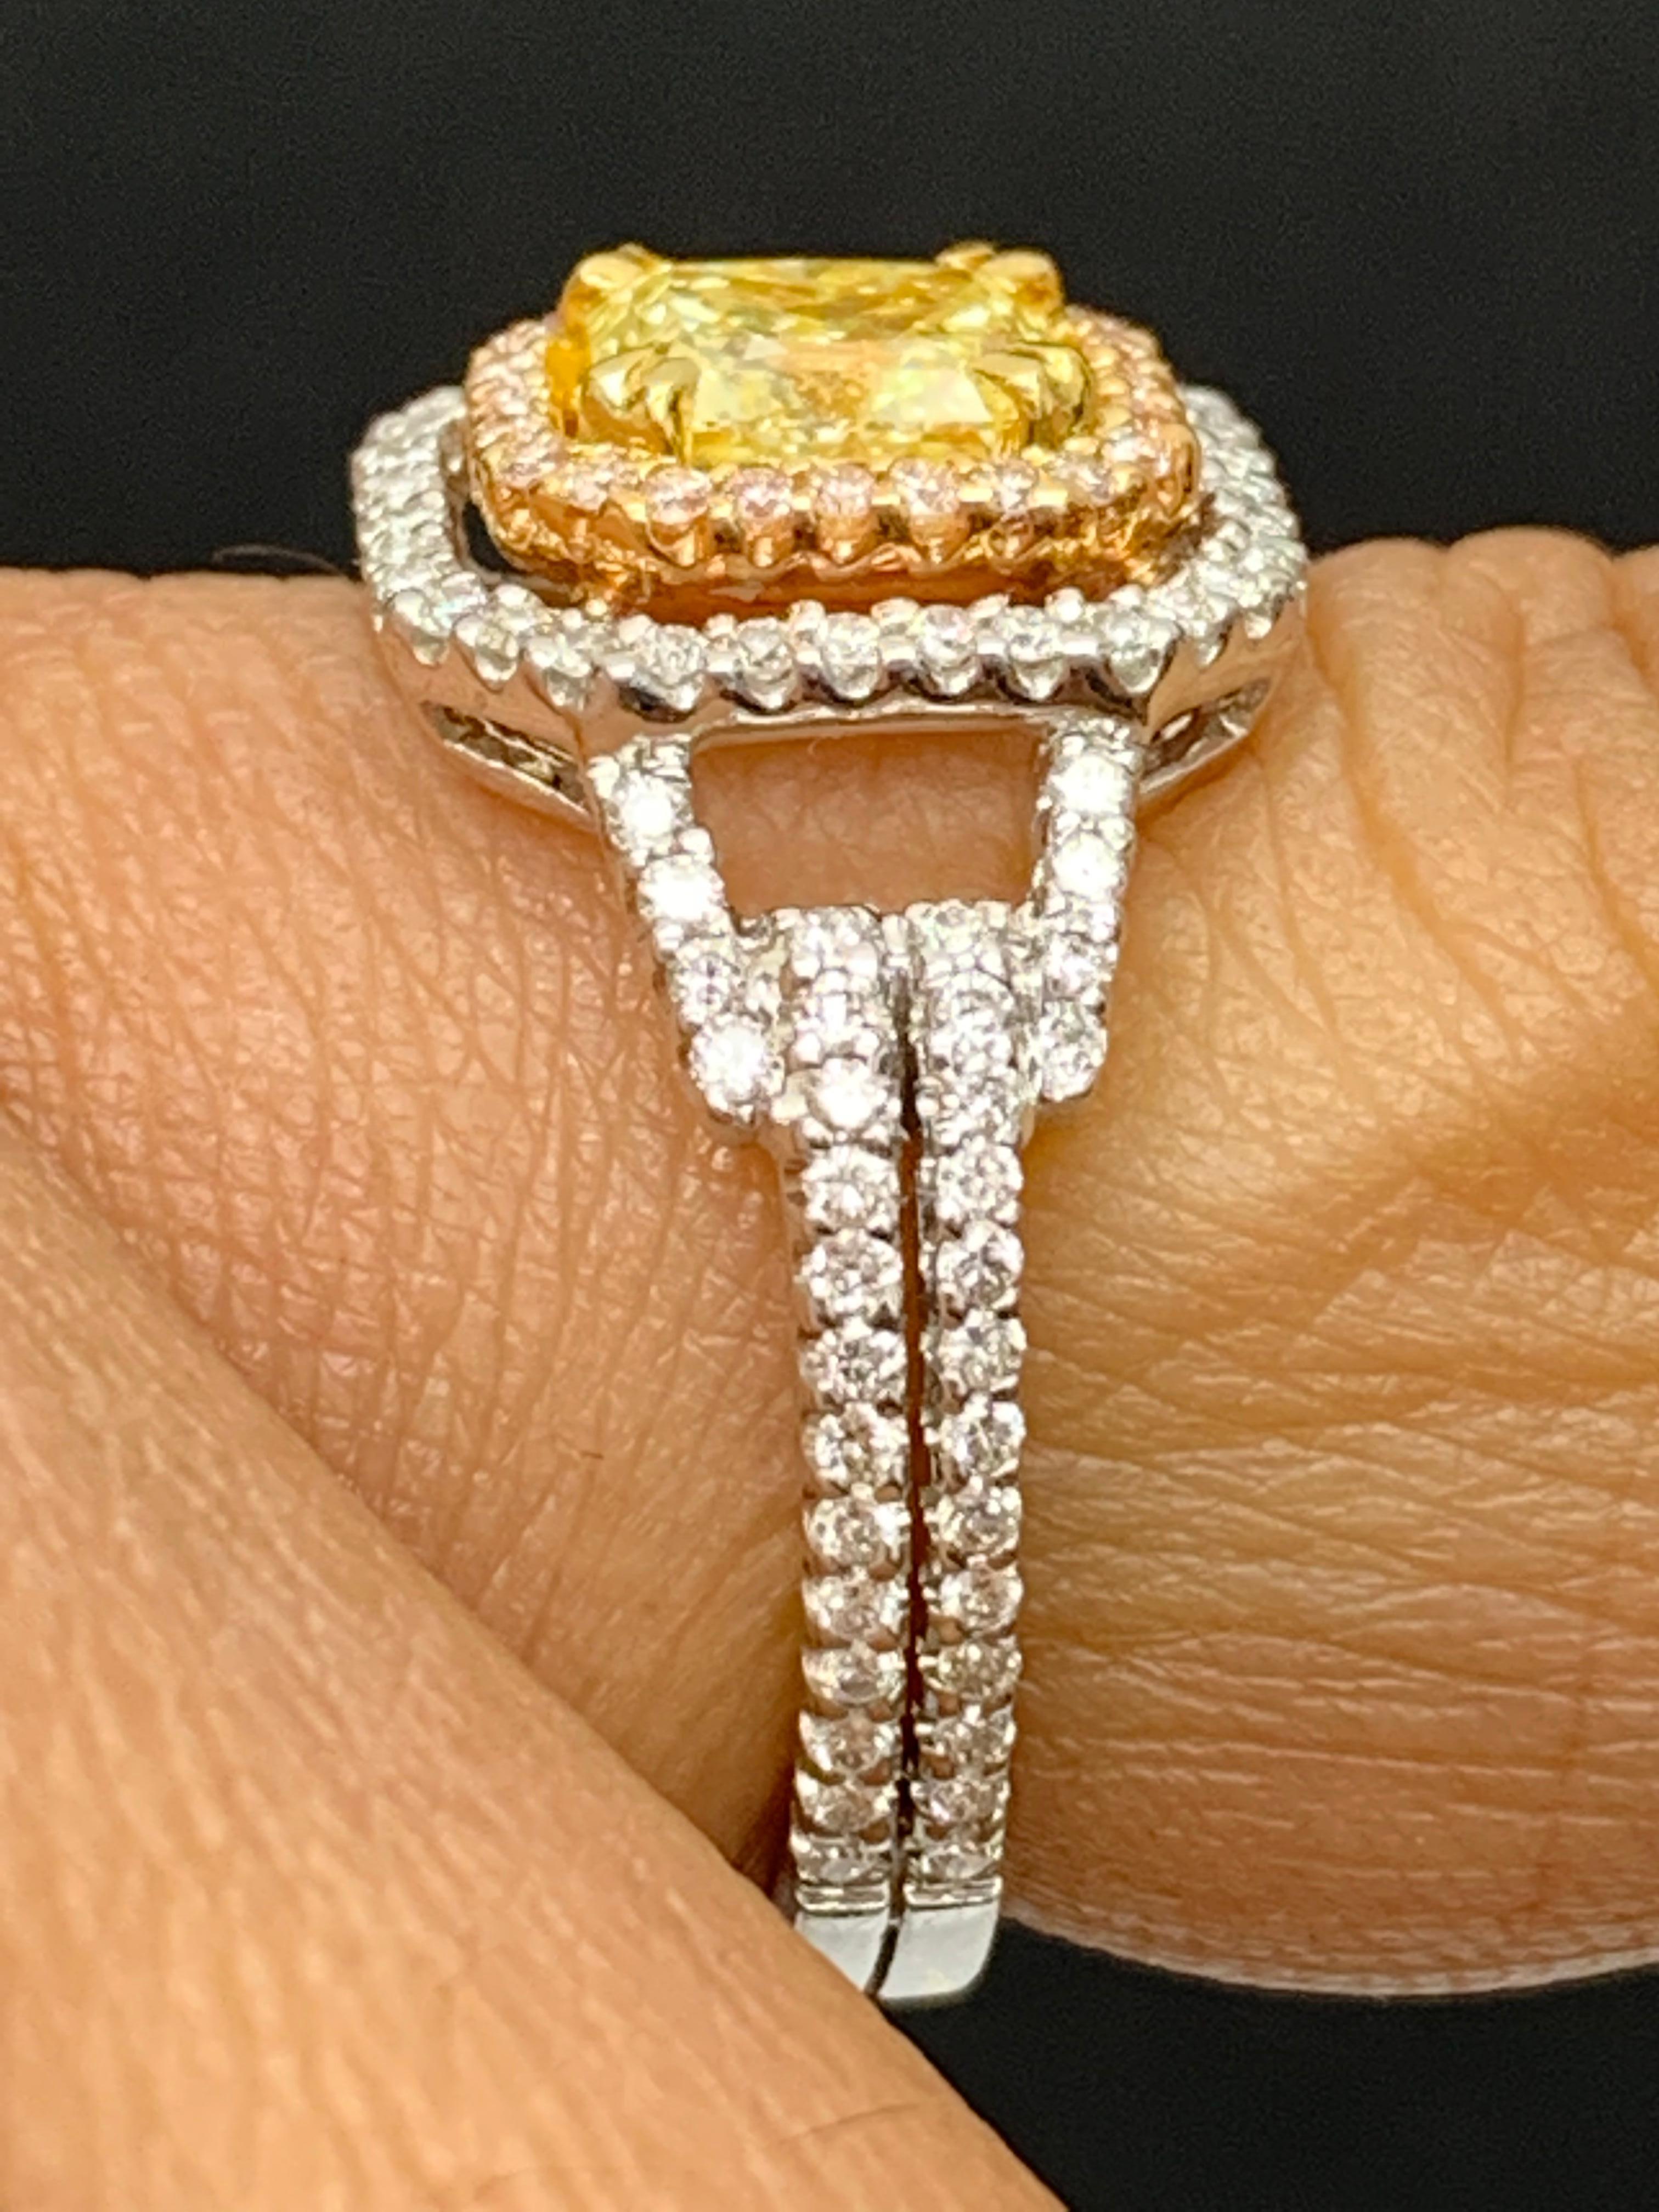 1 Carat Emerald Cut Yellow Diamond Ring in 18k Mix Gold For Sale 6